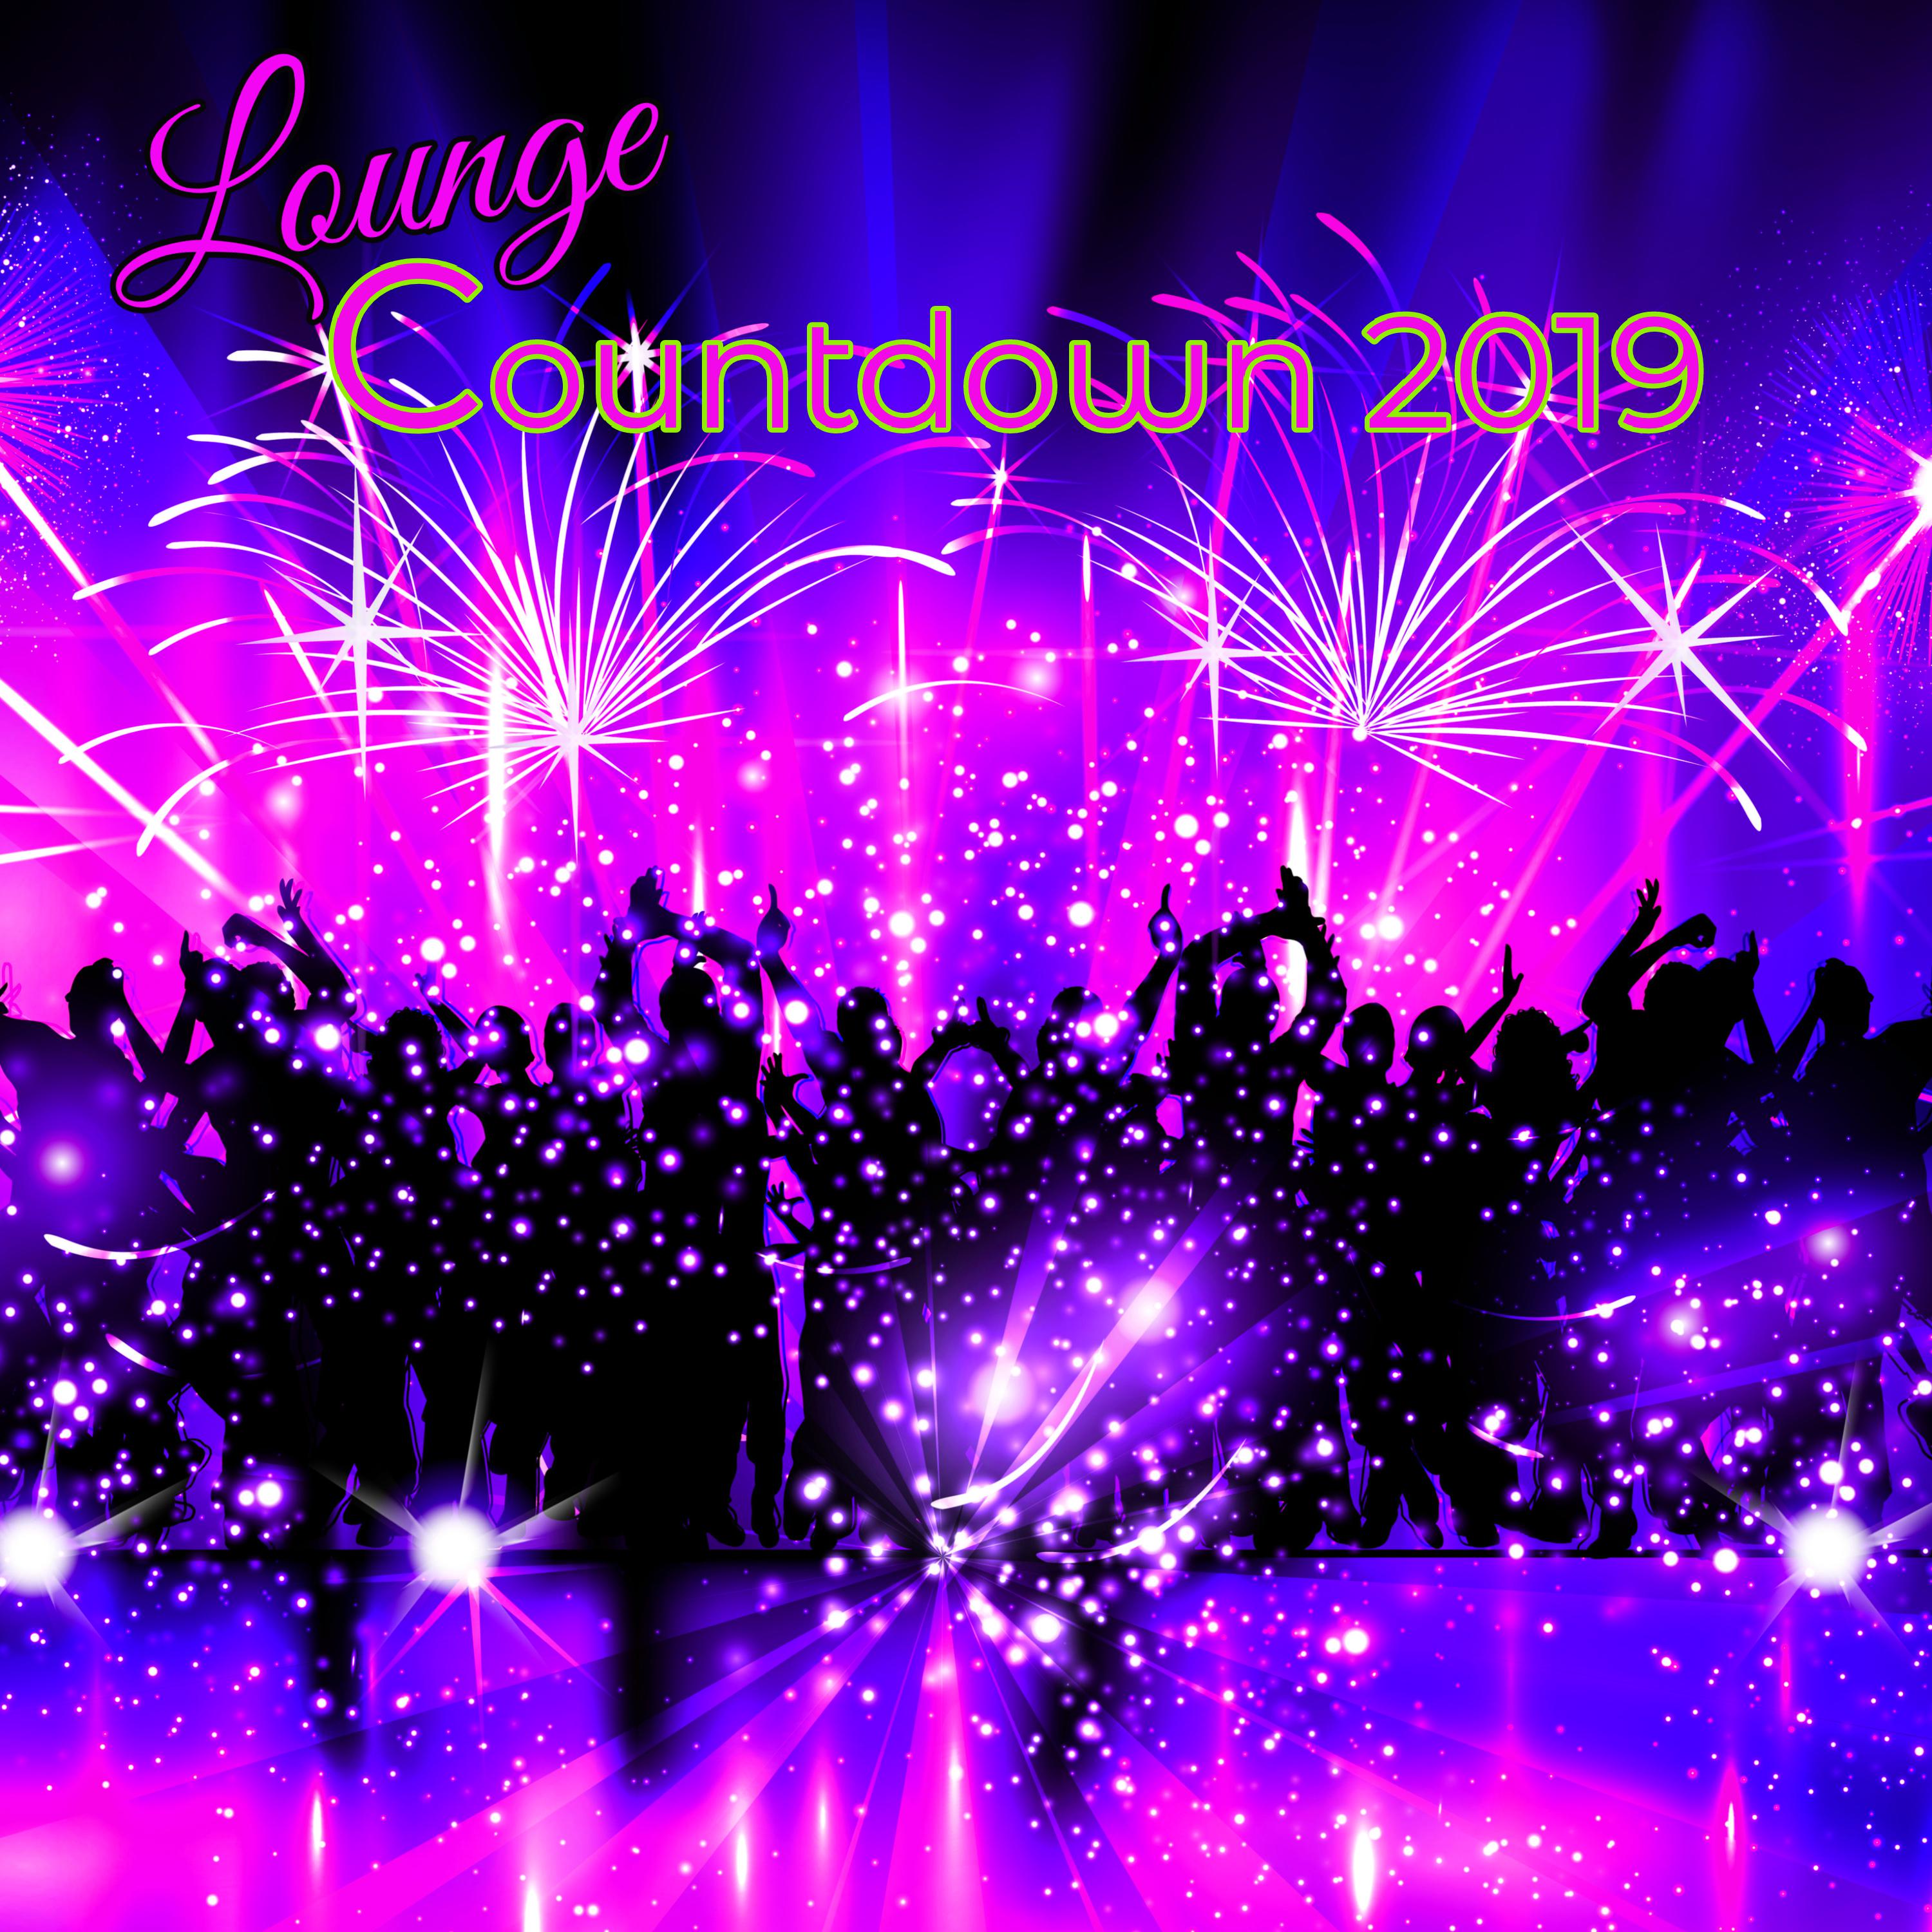 Lounge Countdown 2019  Top 10 Lounge Songs Final Countdown to New Year 2019